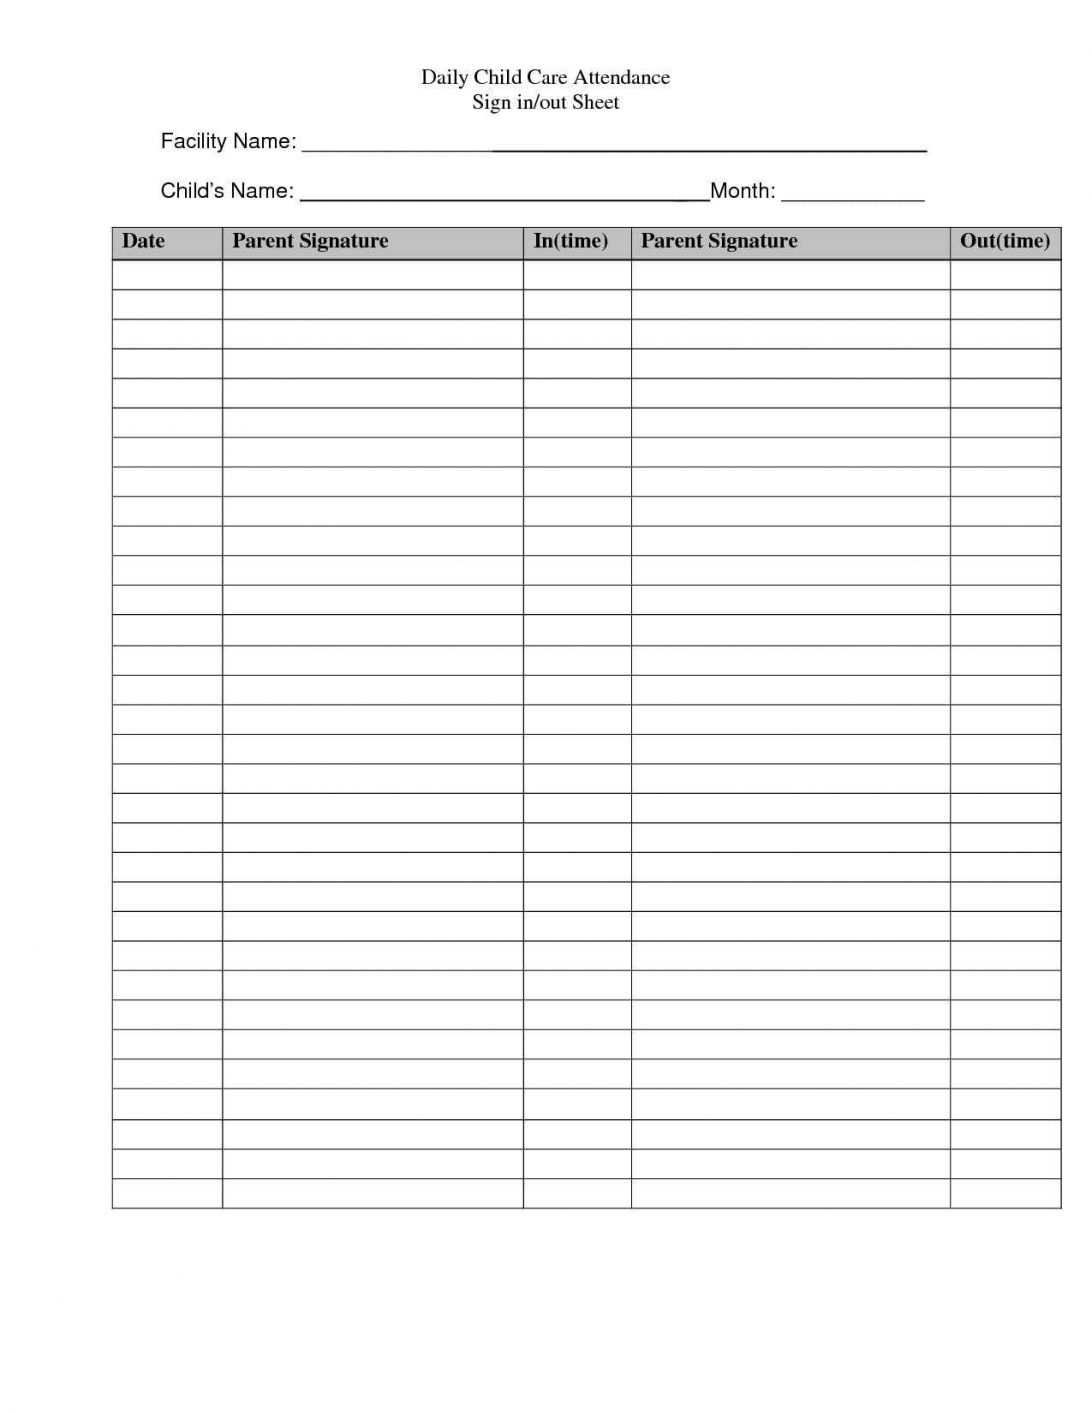 Employee Sign In Sheet Meeting Template Excel Free Doc Pdf Regarding Meeting Sign In Sheet Template